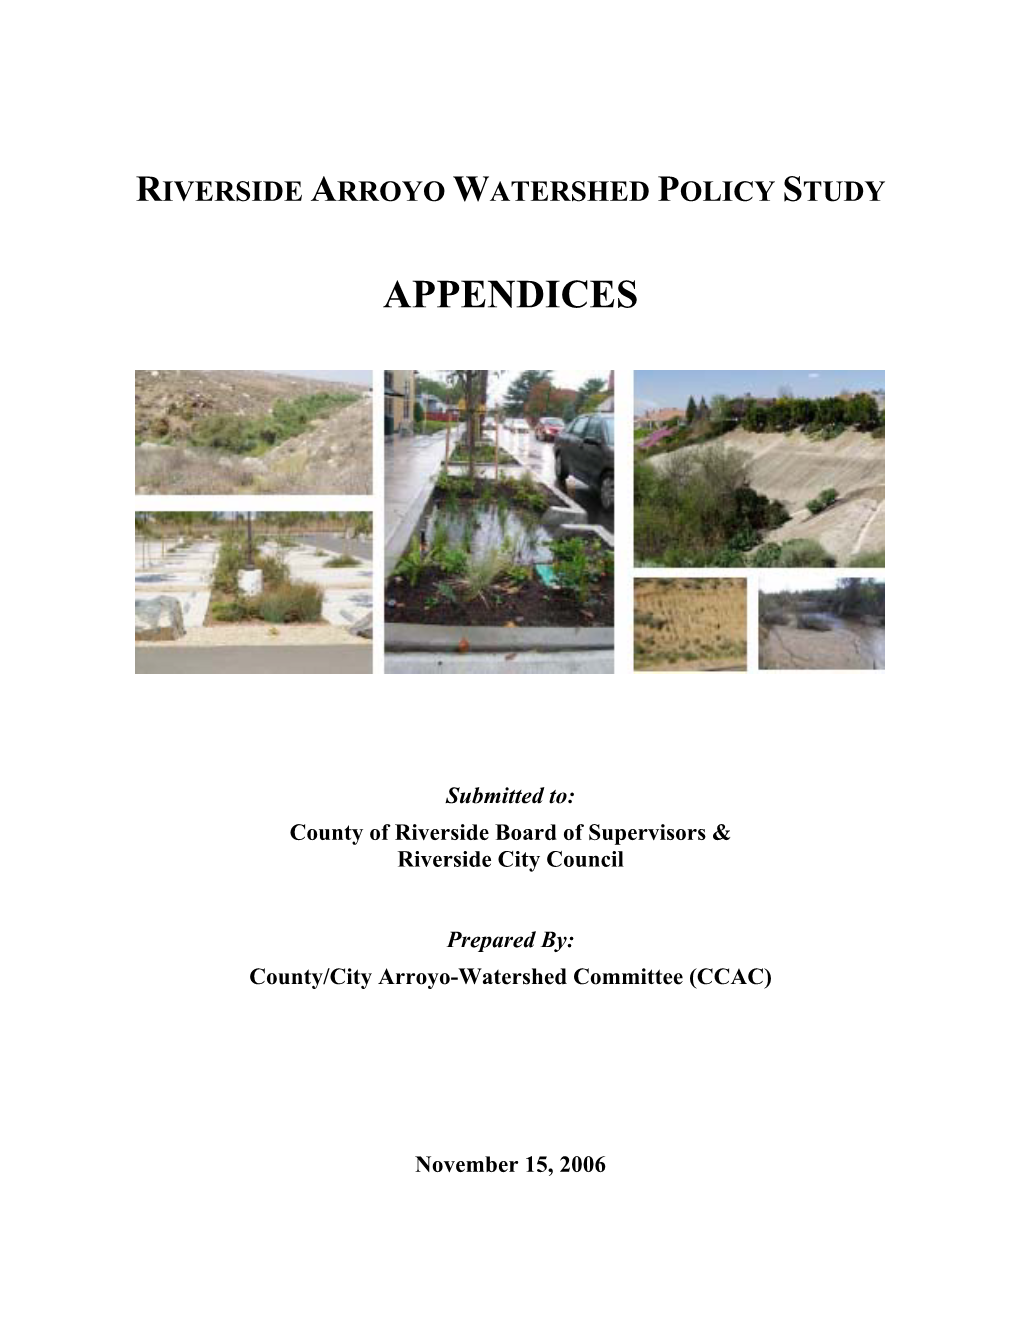 Riverside Arroyo Watershed Policy Study Appendices